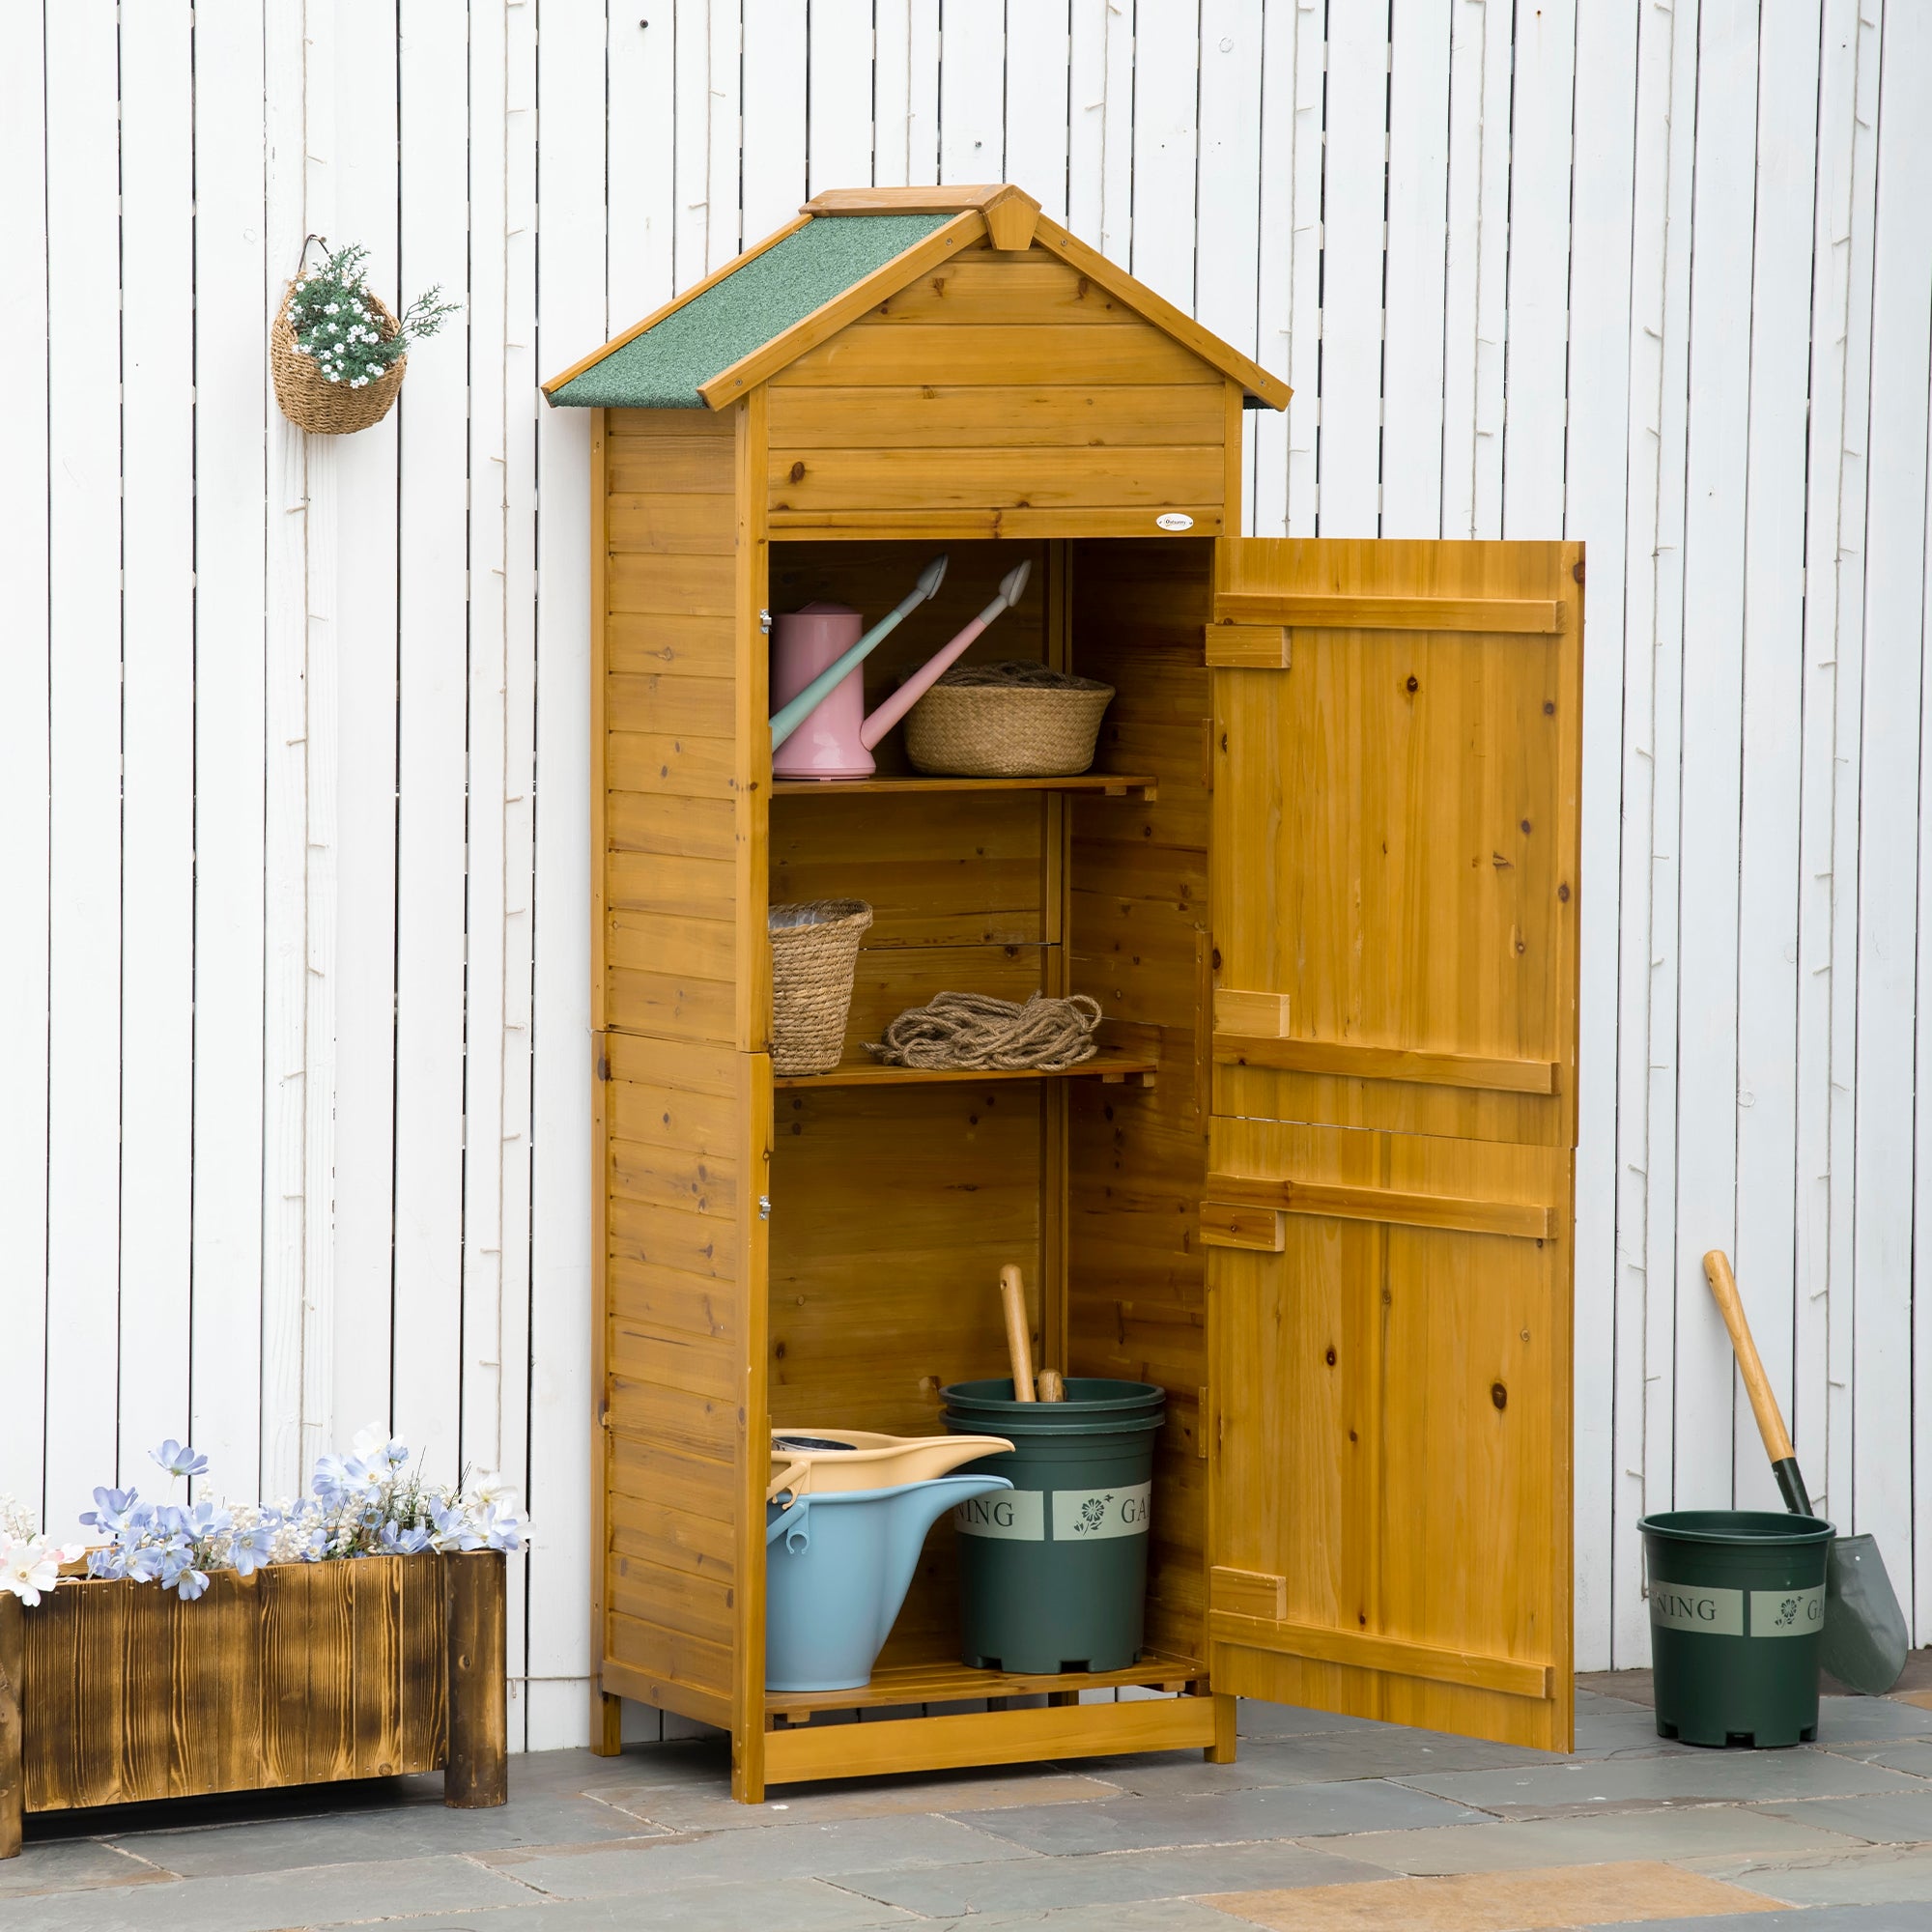 Outsunny Wooden Garden Storage Shed Utility Gardener Cabinet w/ 3 Shelves and 2 Door, 191.5cm x 79cm x 49cm, Natural Wood Effect